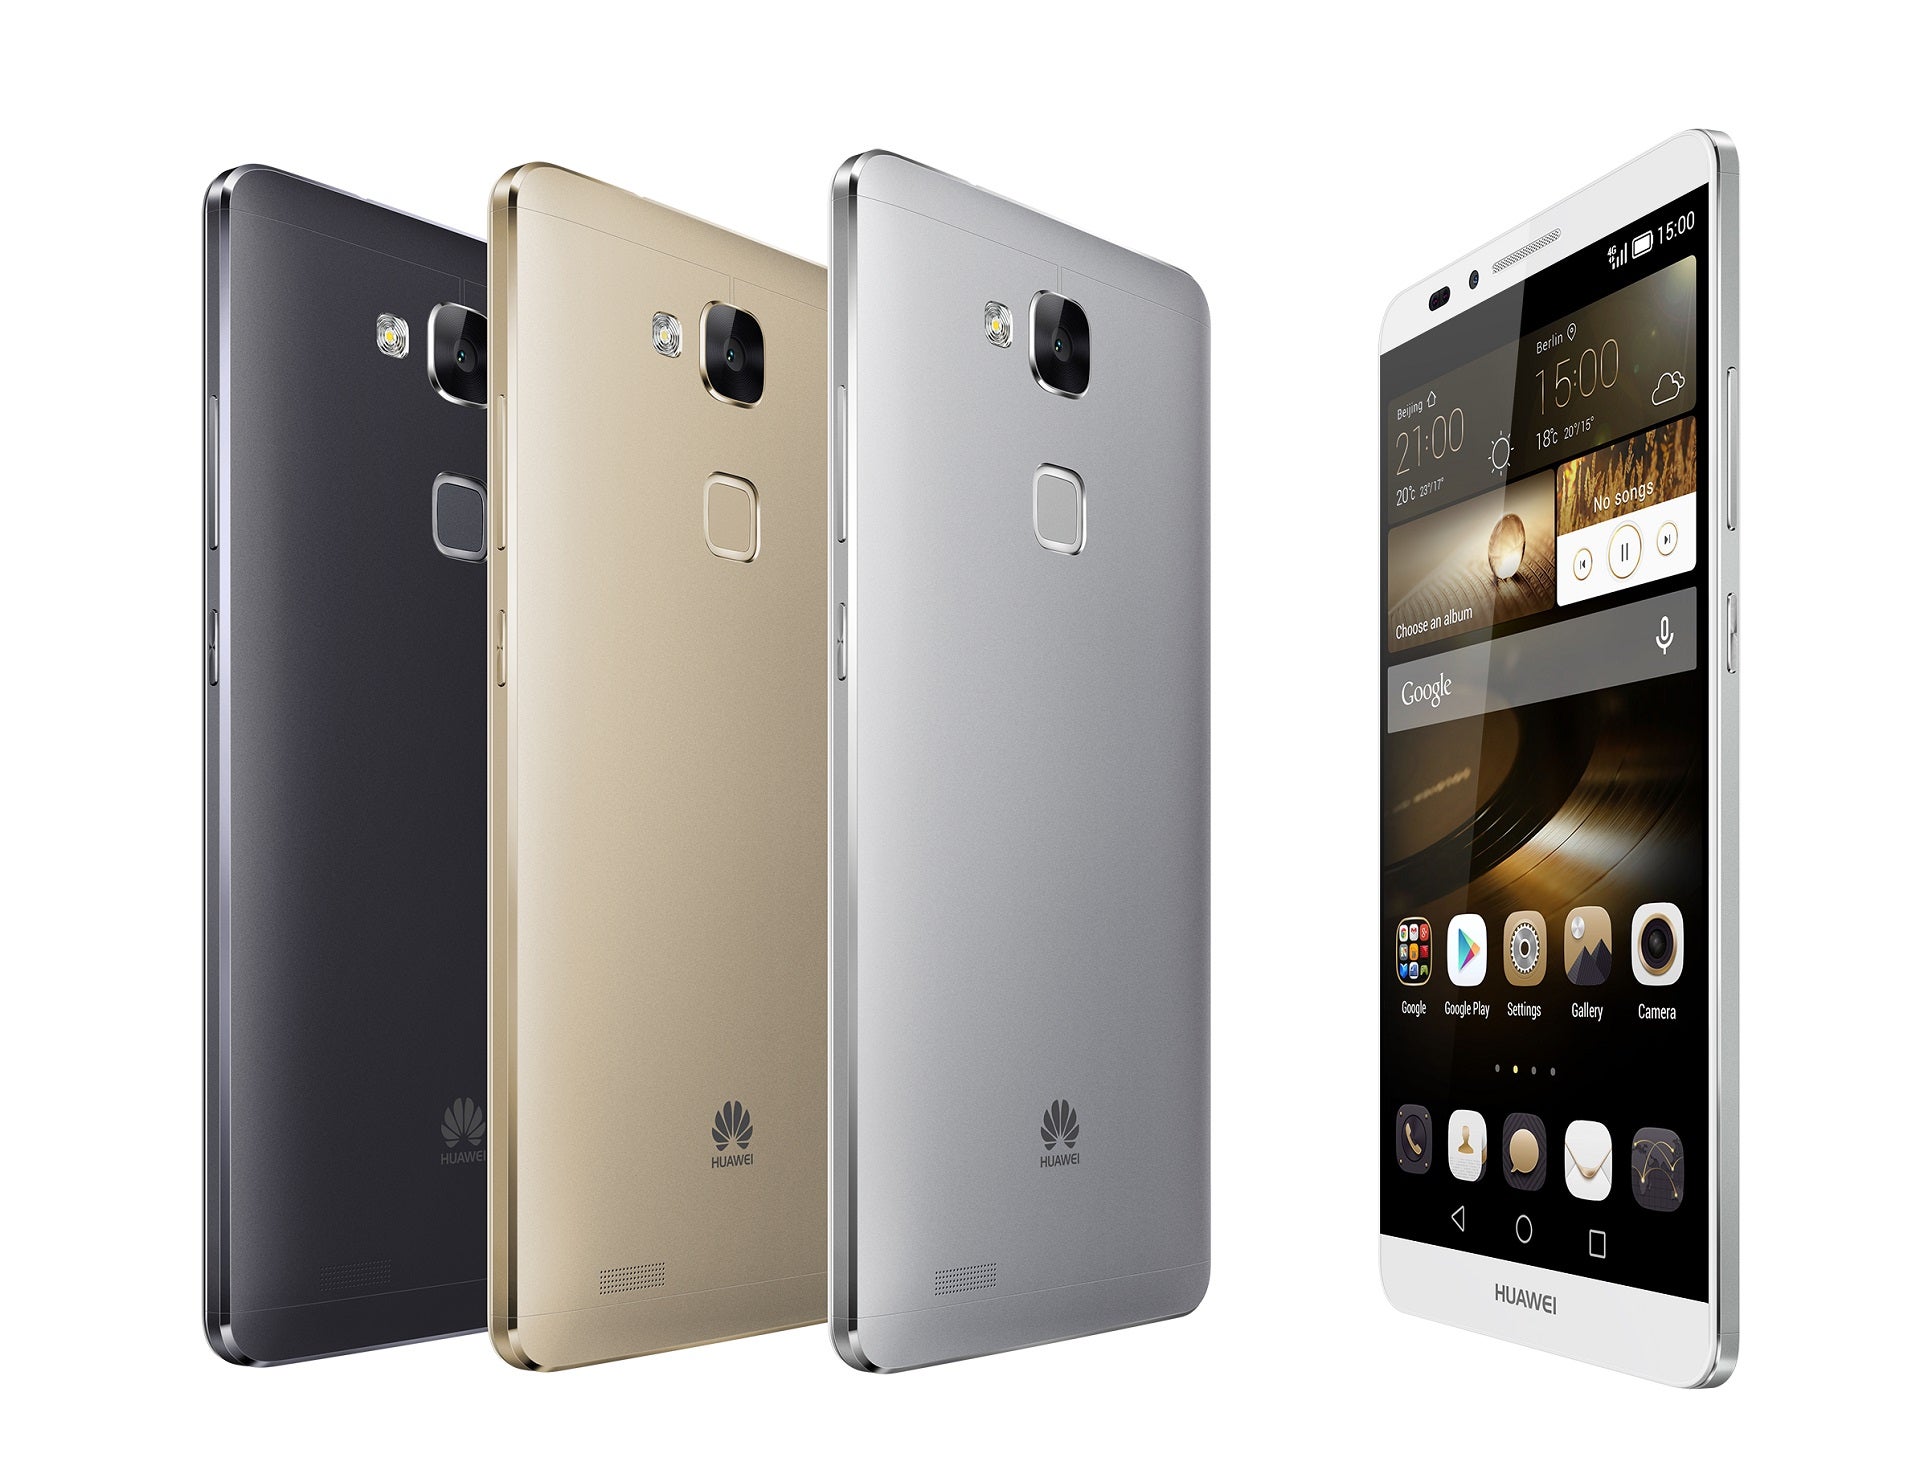 Seven signs you should upgrade to the Huawei Ascend Mate7